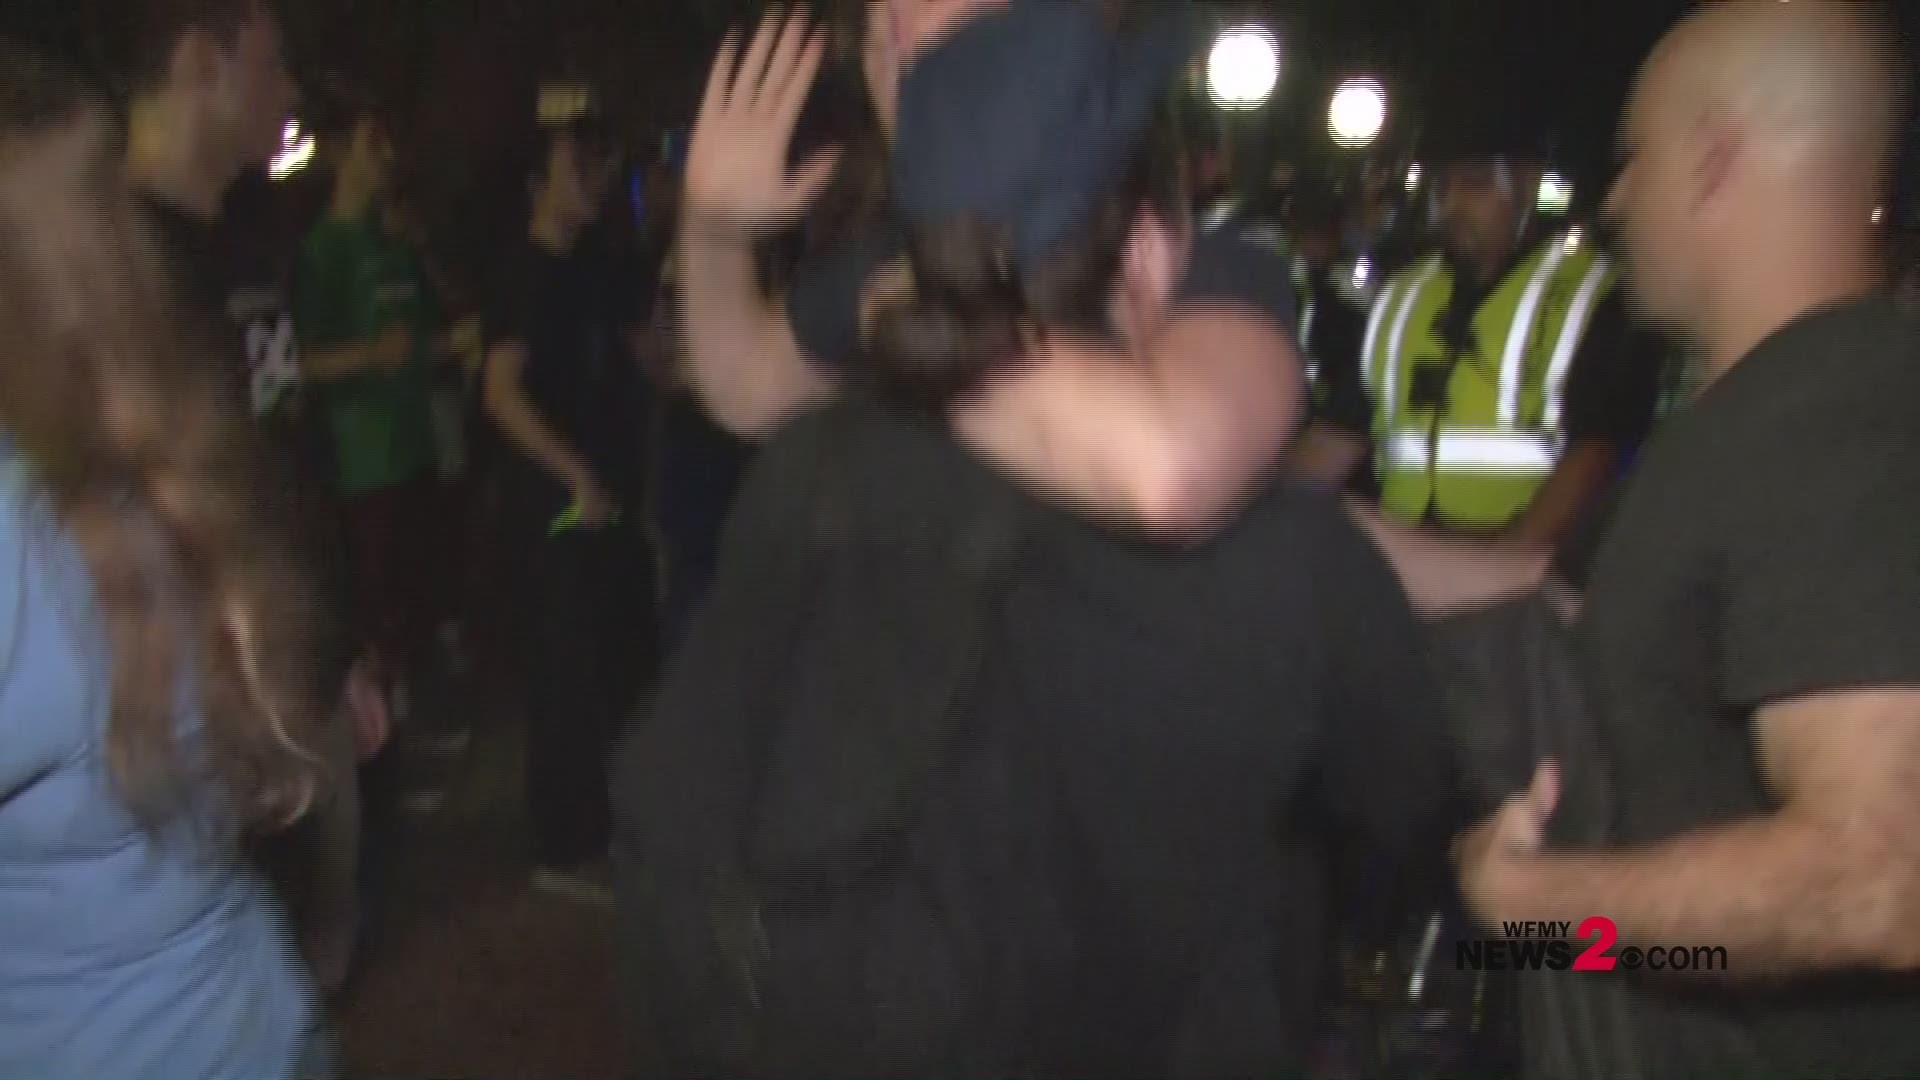 WFMY News 2 was among a crowd of protesters who were pepper sprayed by police as they were enforcing crowd control at the Silent Sam protest at UNC-Chapel Hill